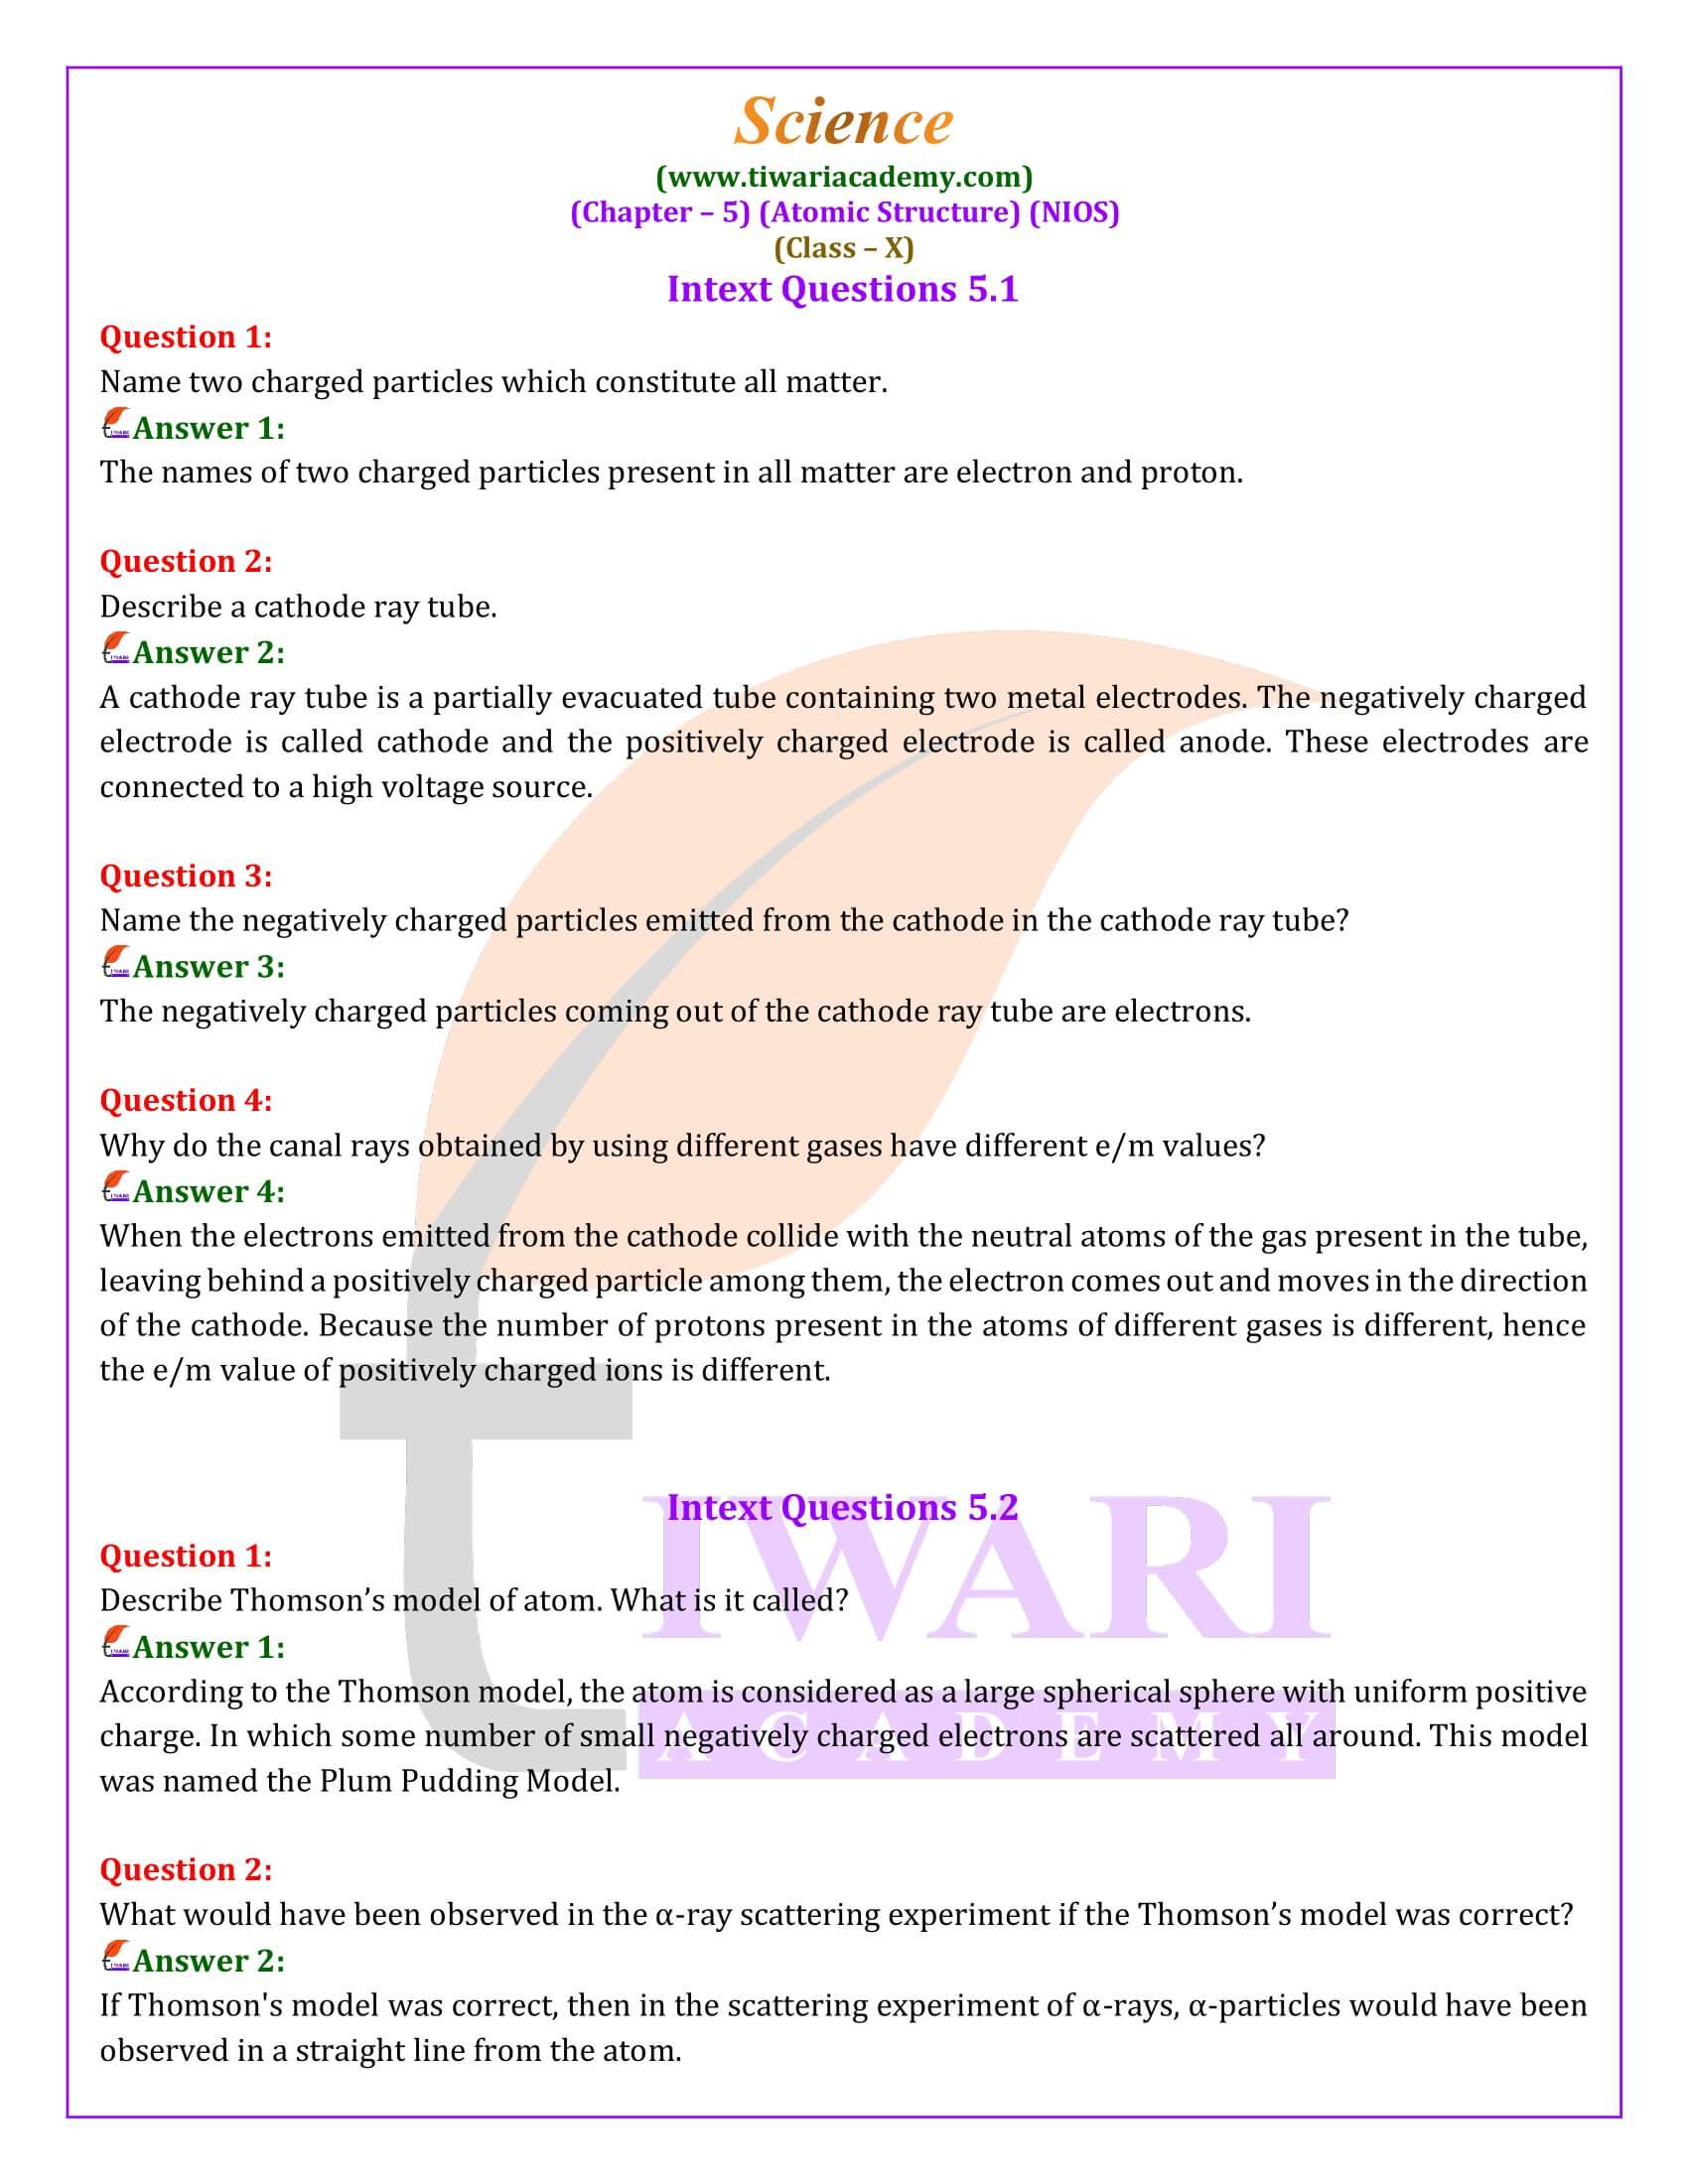 NIOS Class 10 Science Chapter 5 Atomic Structure Question Answers